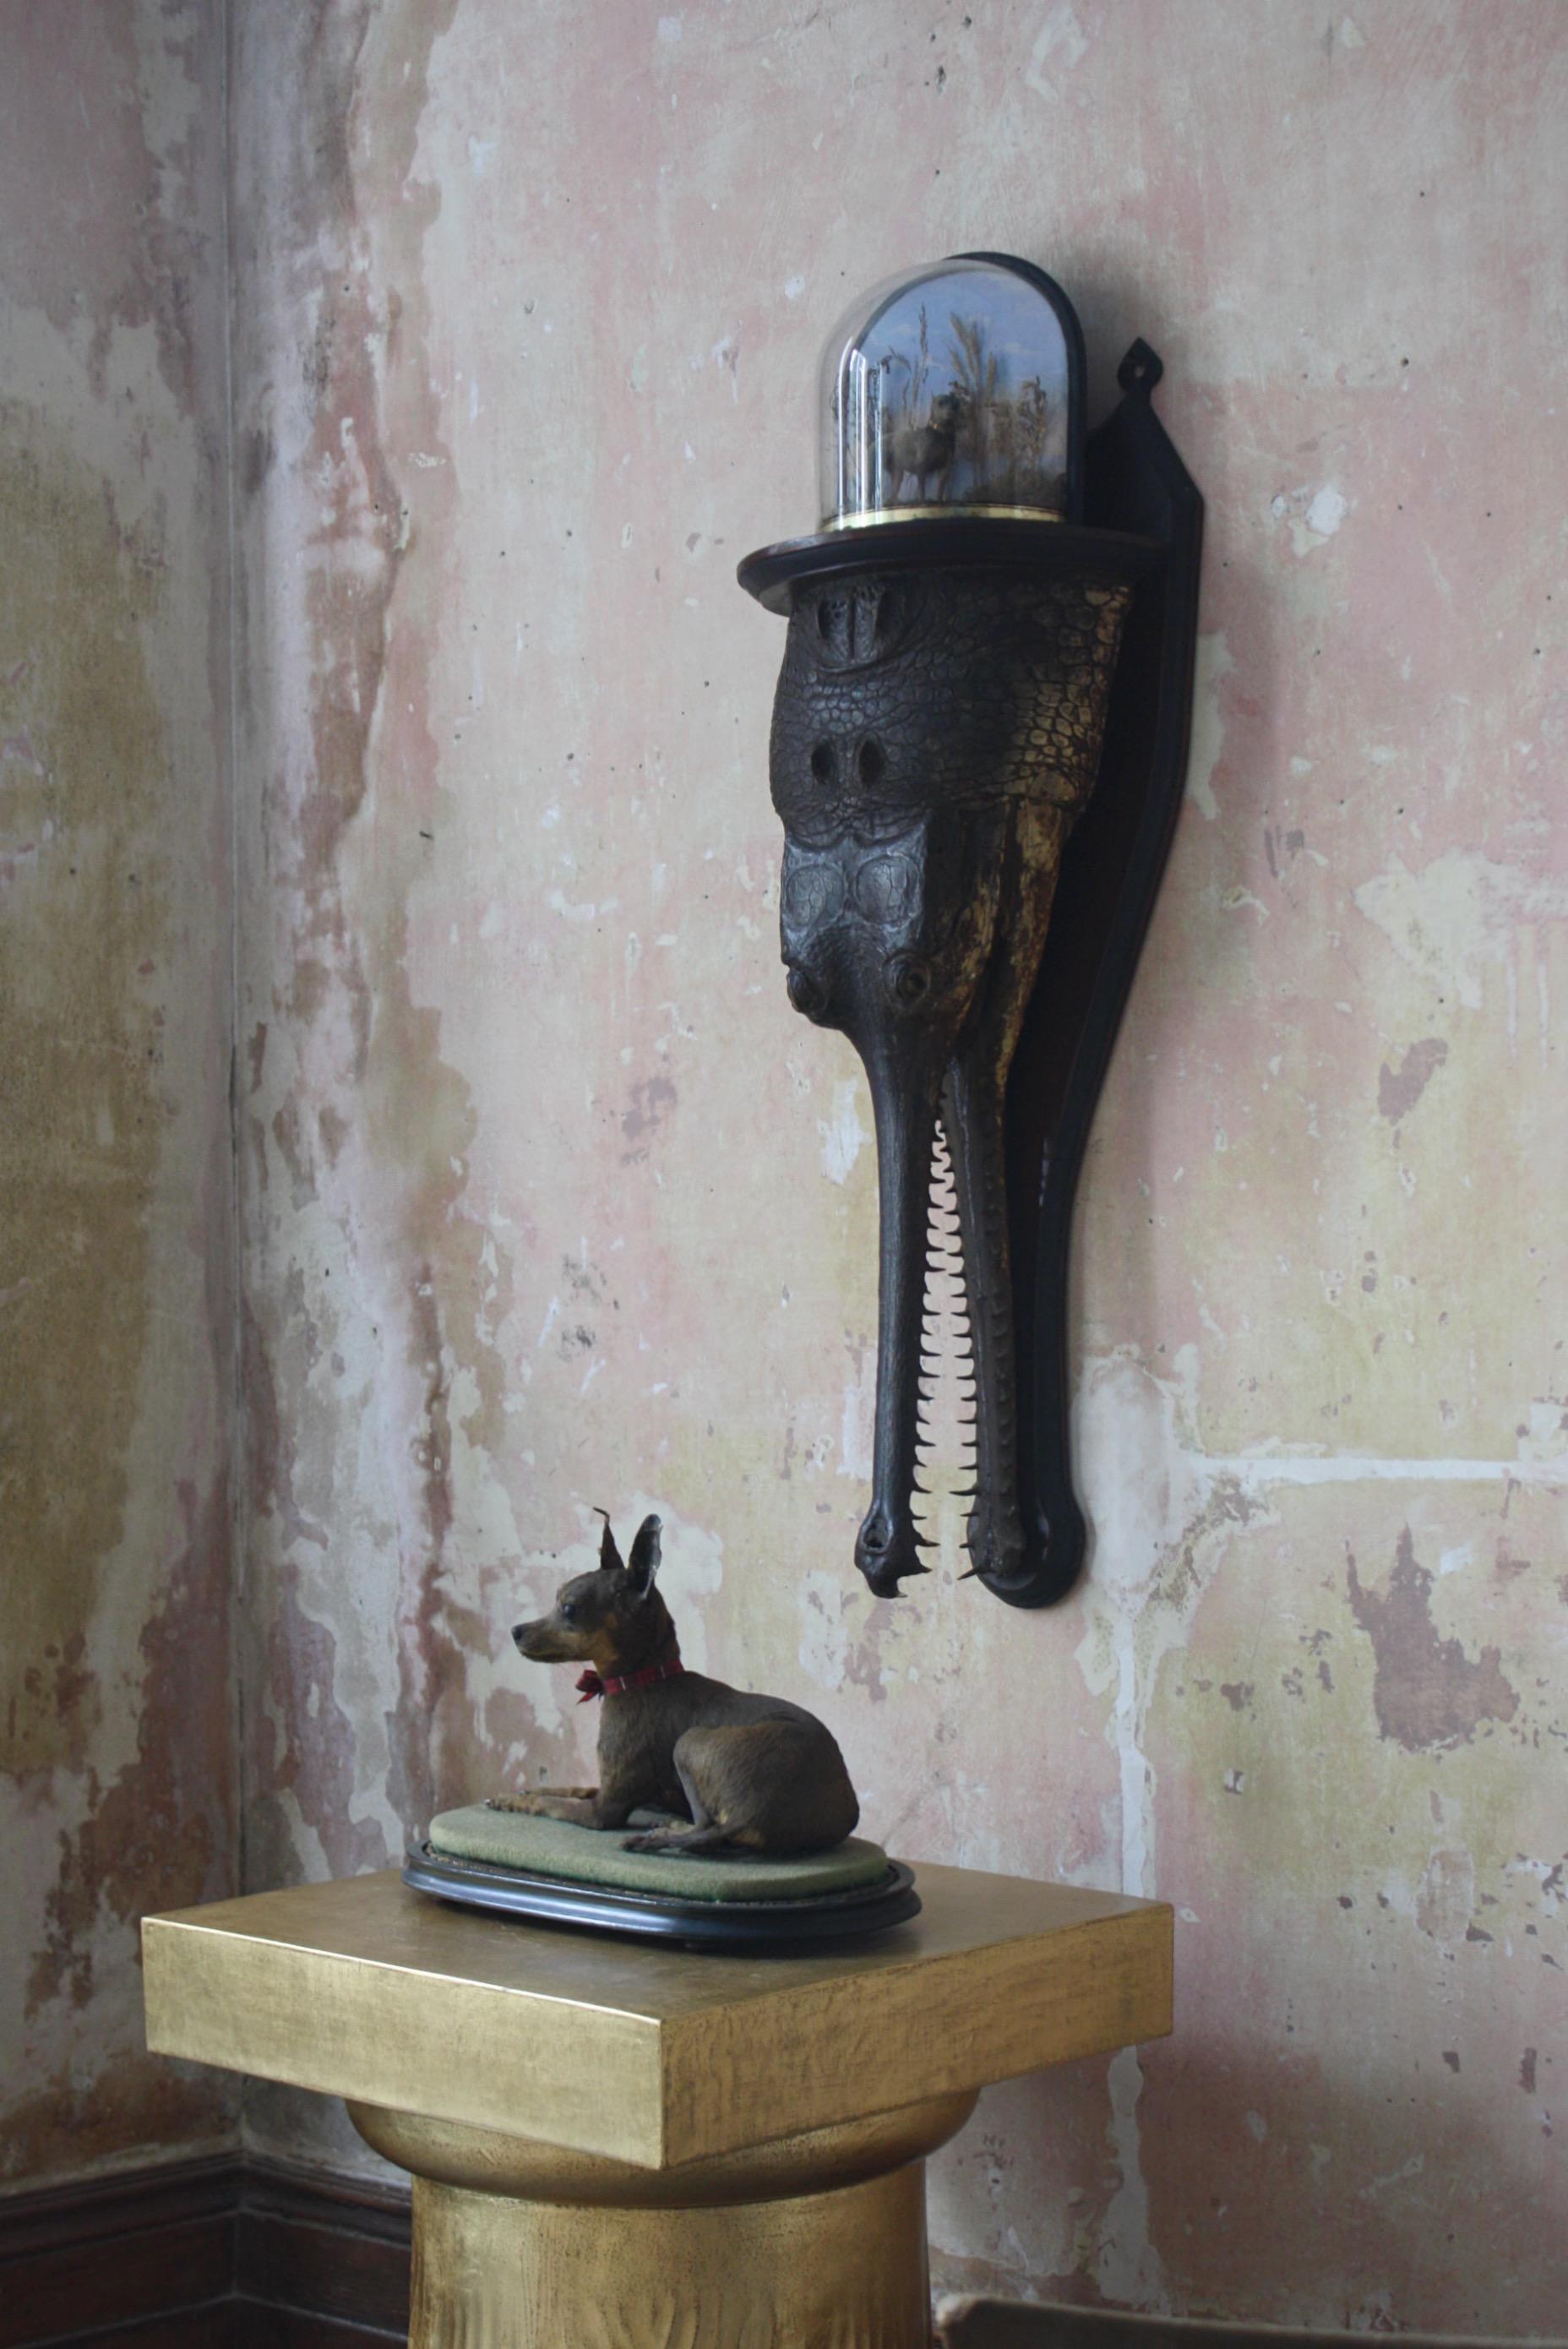 A late 19th to early 20th century taxidermy head study of a juvenile gharial or gavial crocodile (Gavialis Gangeticus) with inset glass eyes, mounted to a shield backed bracket shelf.

Provenance - Taken by the previous owner's grandfather when he